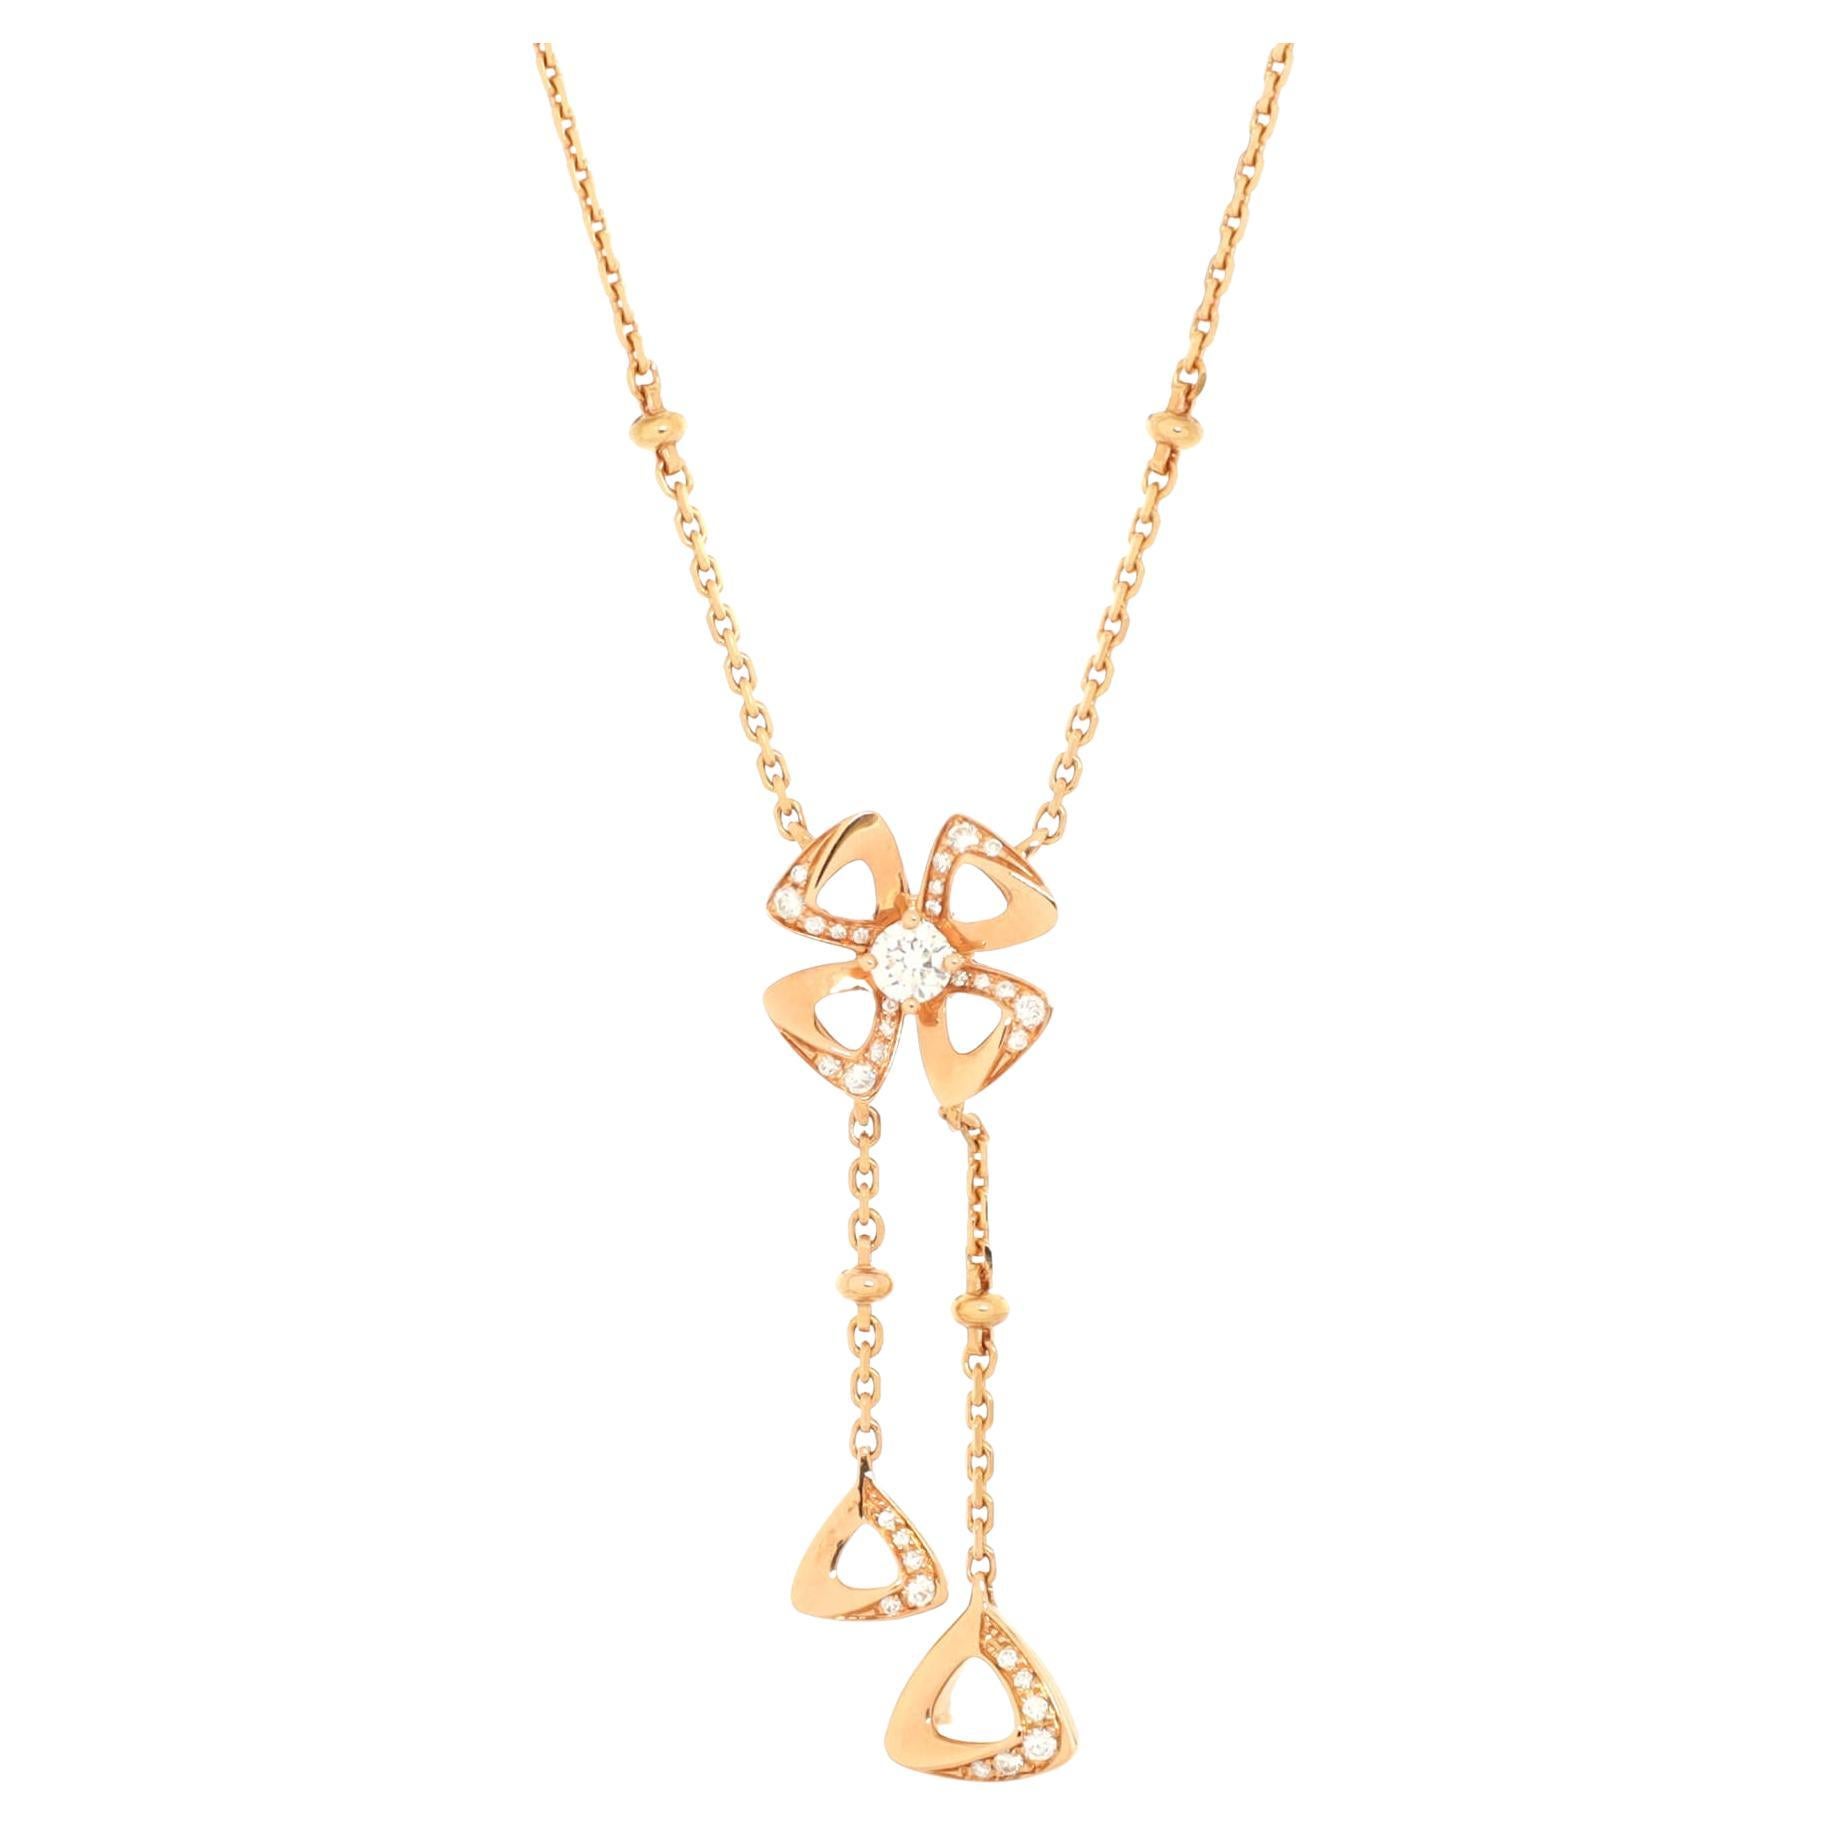 Bvlgari Fiorever Drop Pendant Necklace 18K Rose Gold and Diamonds For Sale